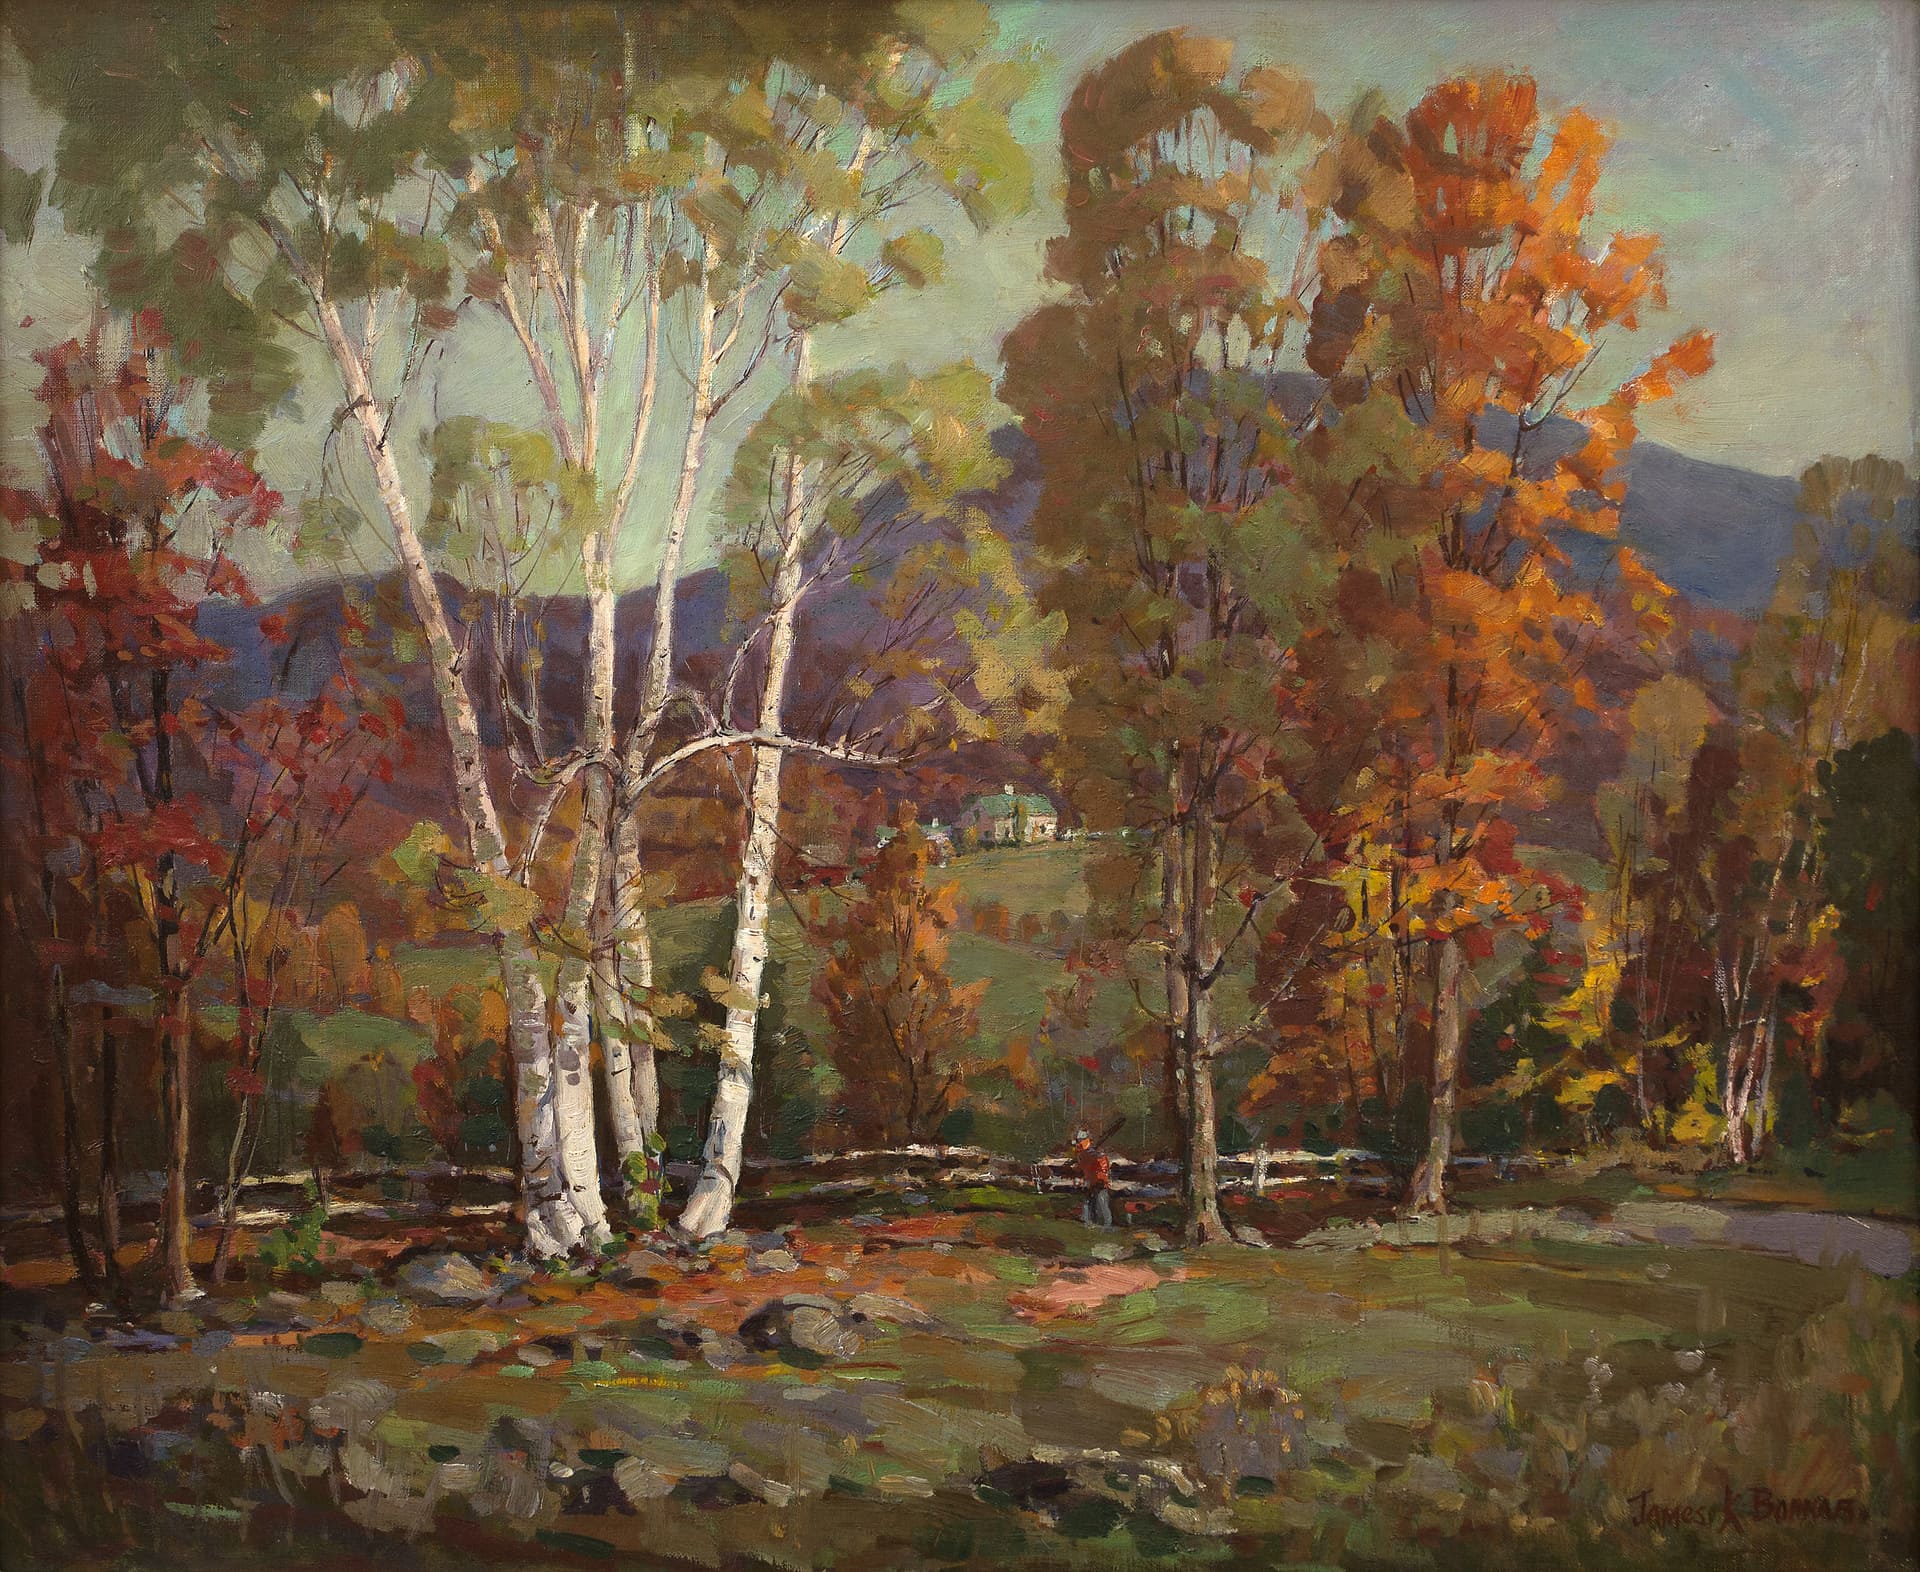 James King Bonnar's “Indian Summer” - a hunter with his rifle walks along an autumn colored landscape